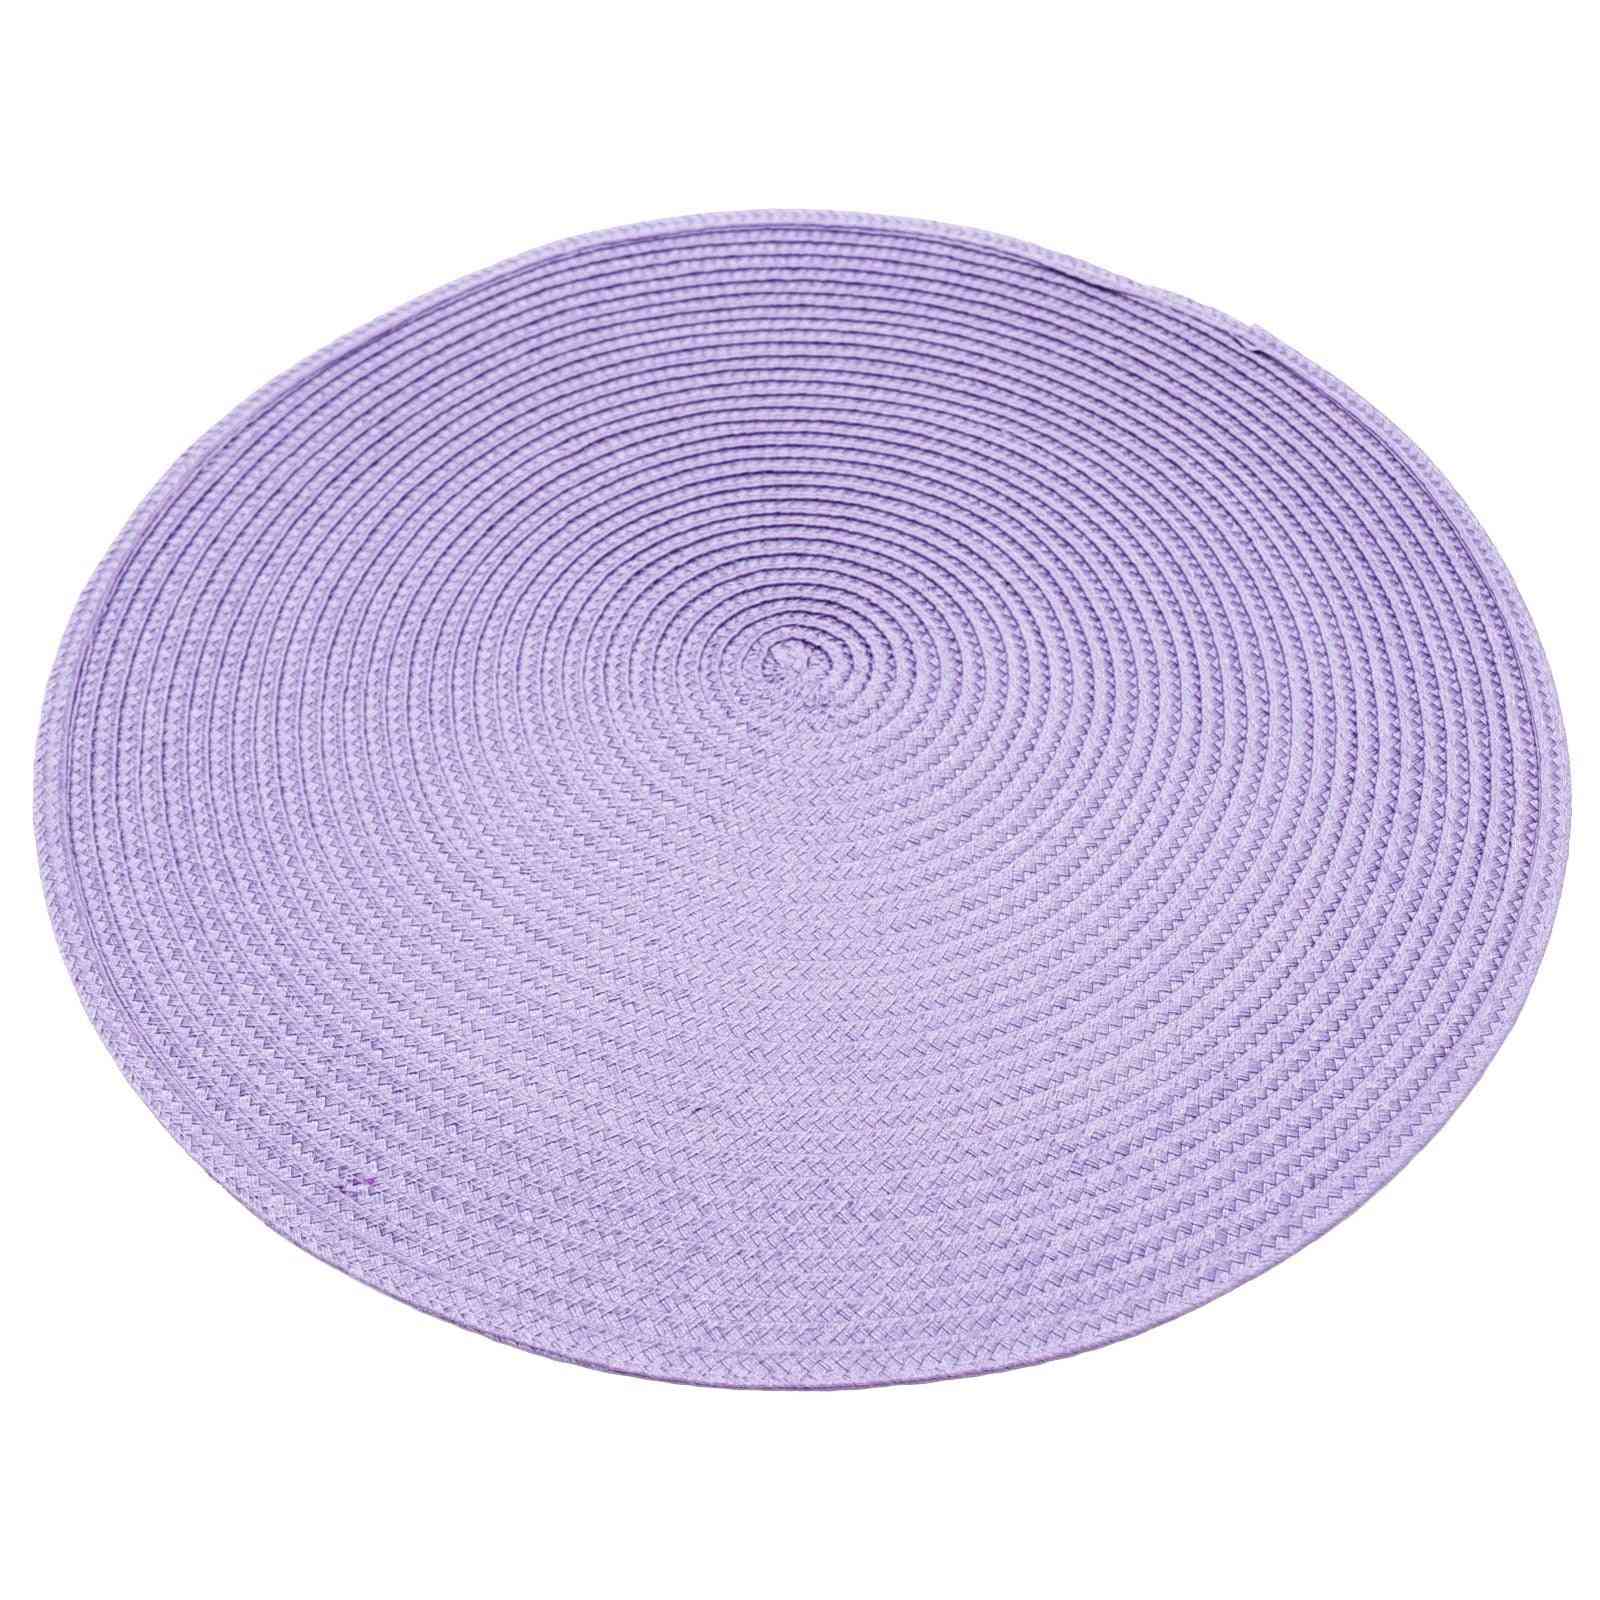 Heat Resistant Pp Dining Table Mat Woven Placemat Pad